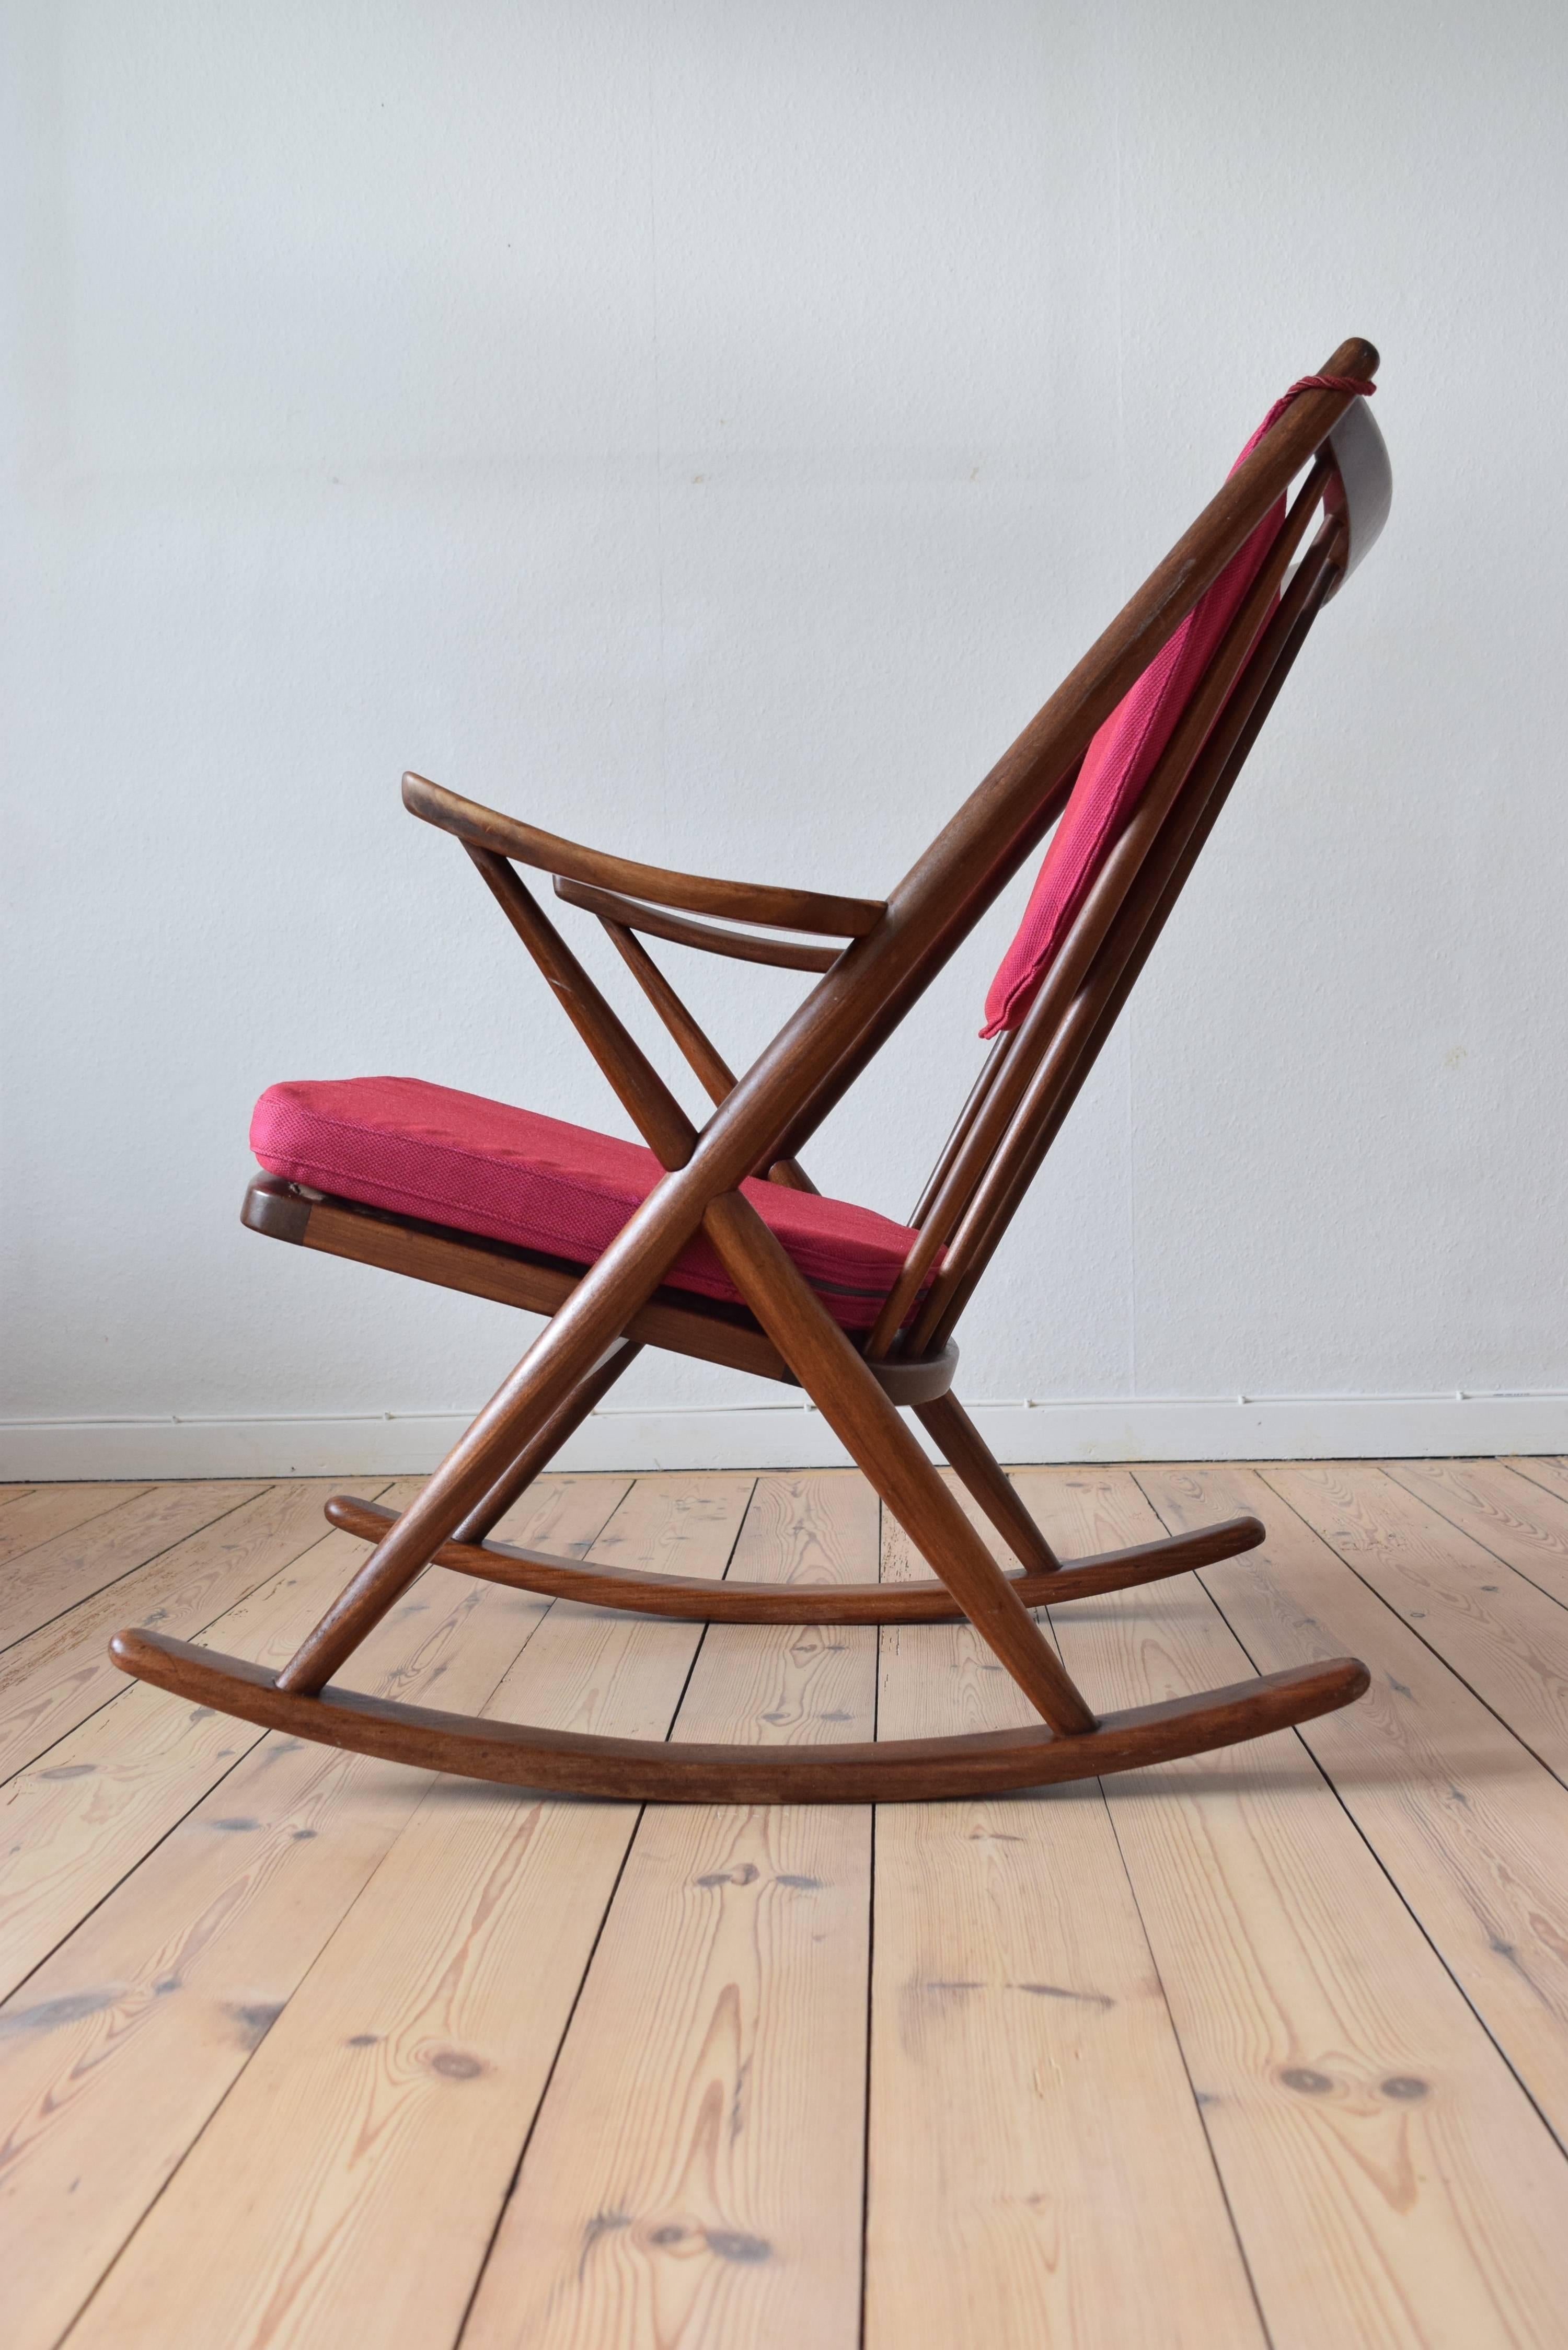 This Mid-Century Modern rocking chair was designed by Frank Reenskaug in 1958 and manufactured by Bramin Møbler in Denmark. It is built from solid African teak and features a crossed frame between the skids and slightly curved armrests and has been